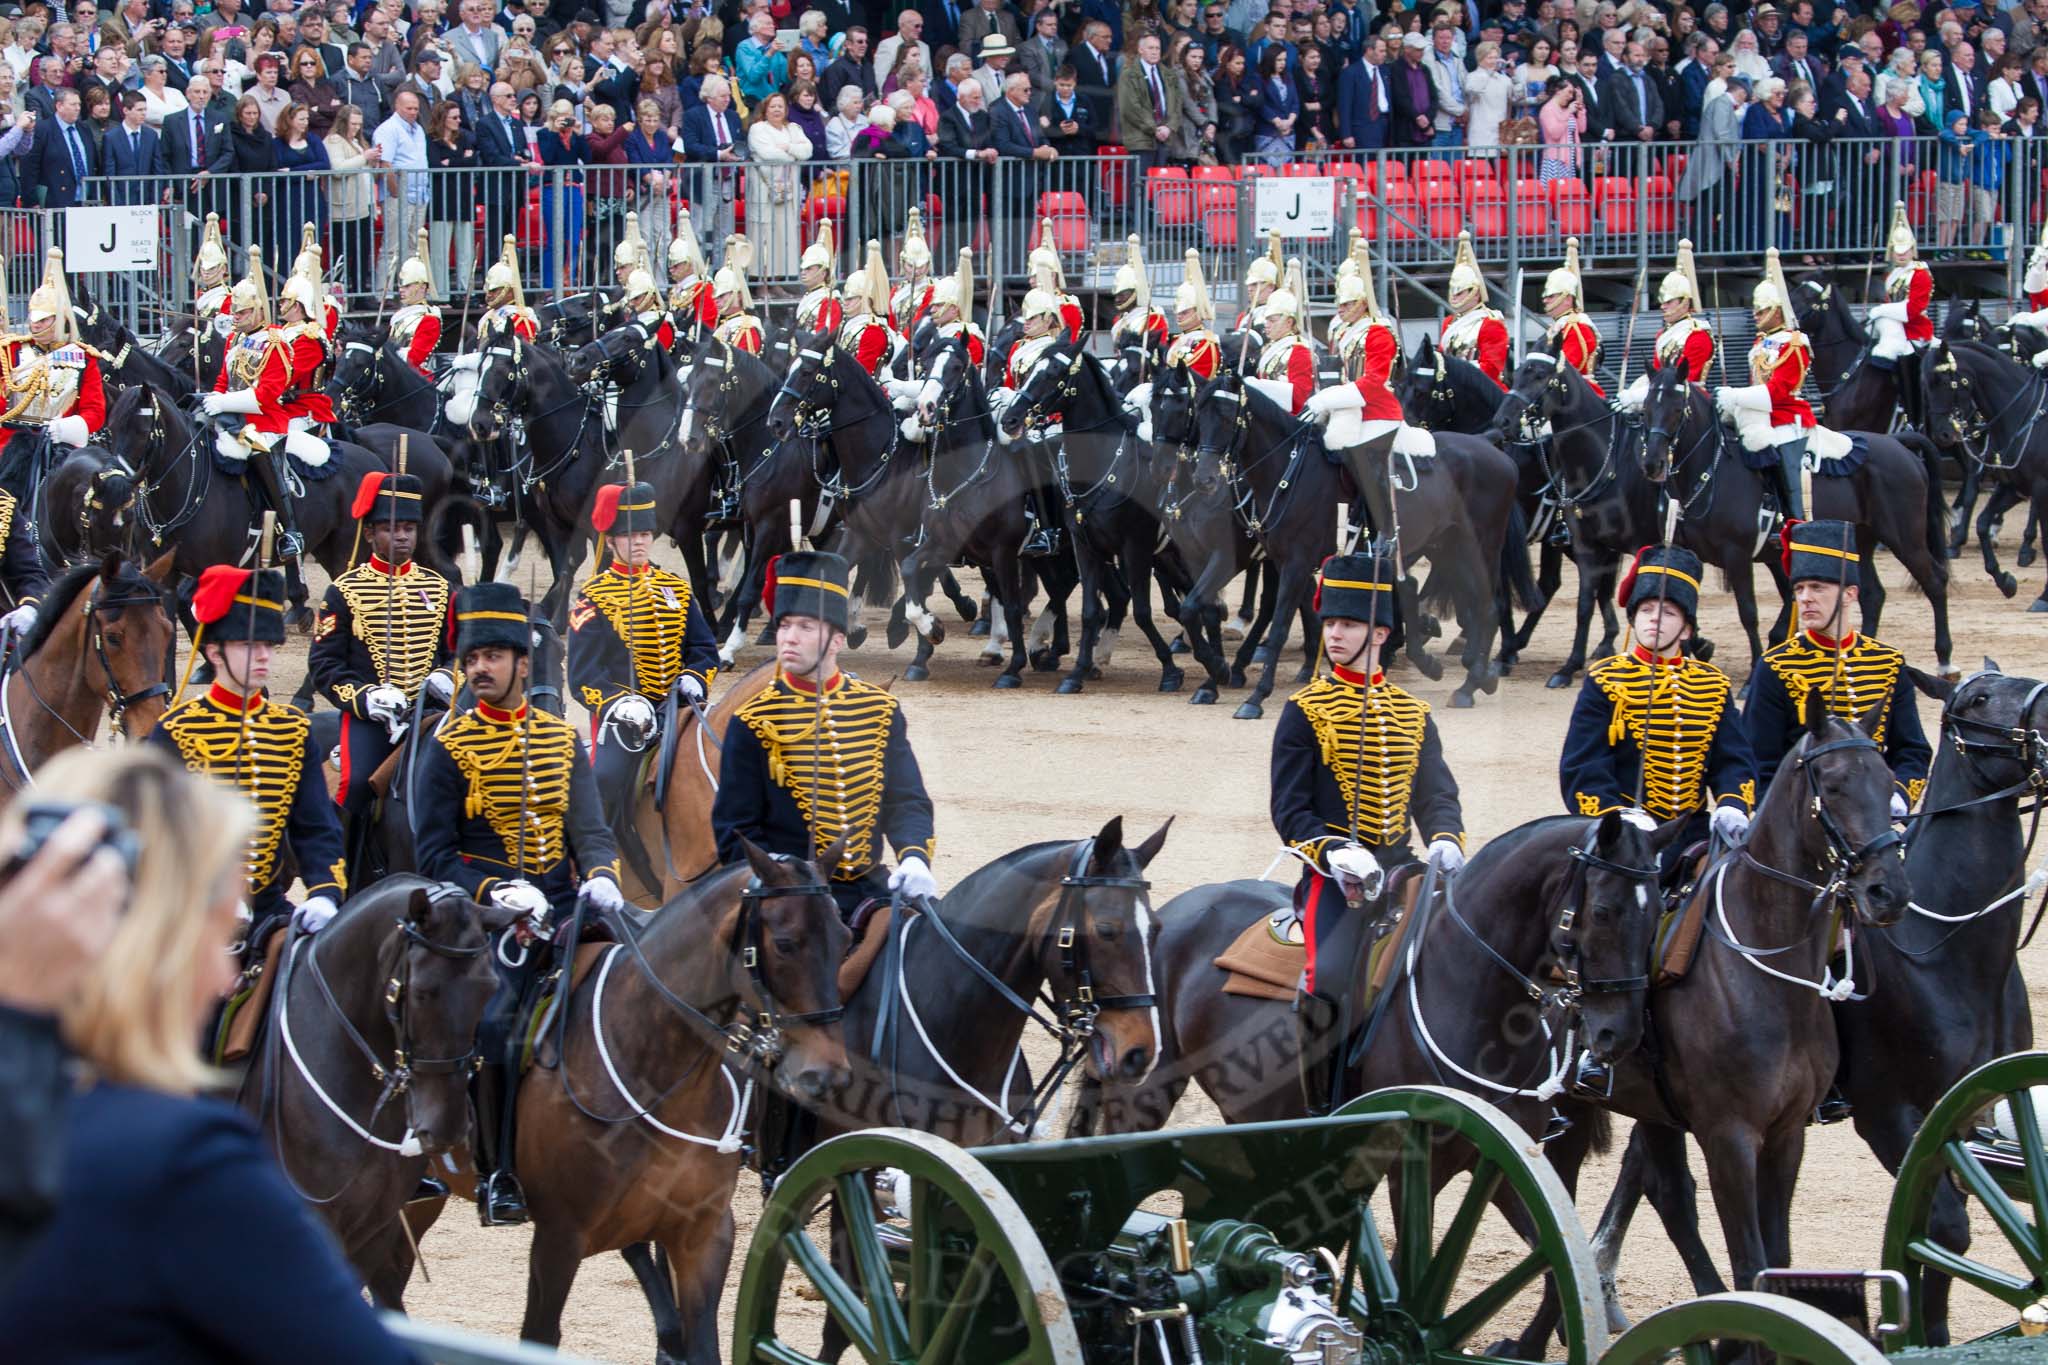 Major General's Review 2013: The Ride Past - the King's Troop Royal Horse Artillery..
Horse Guards Parade, Westminster,
London SW1,

United Kingdom,
on 01 June 2013 at 11:52, image #608